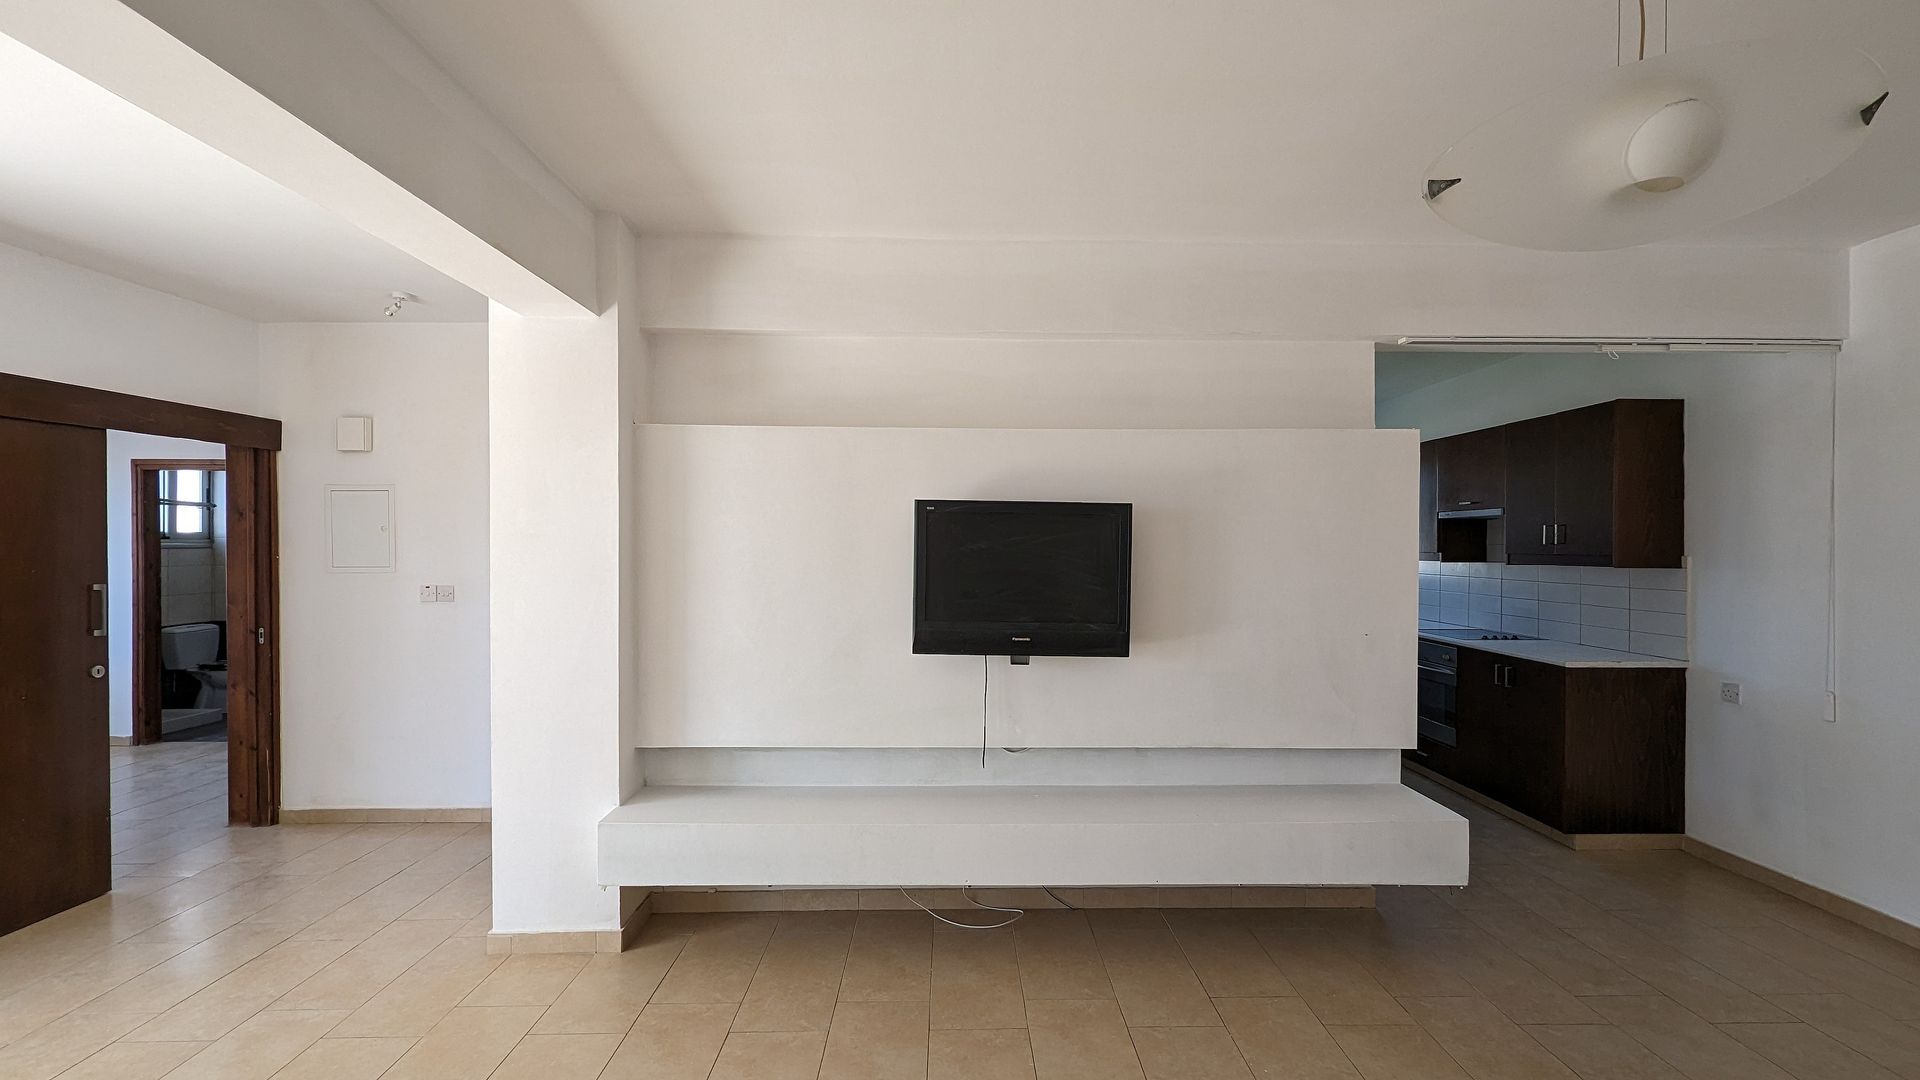 TWO BEDROOM APARTMENT FOR SALE IN PERVOLIA/LARNACA